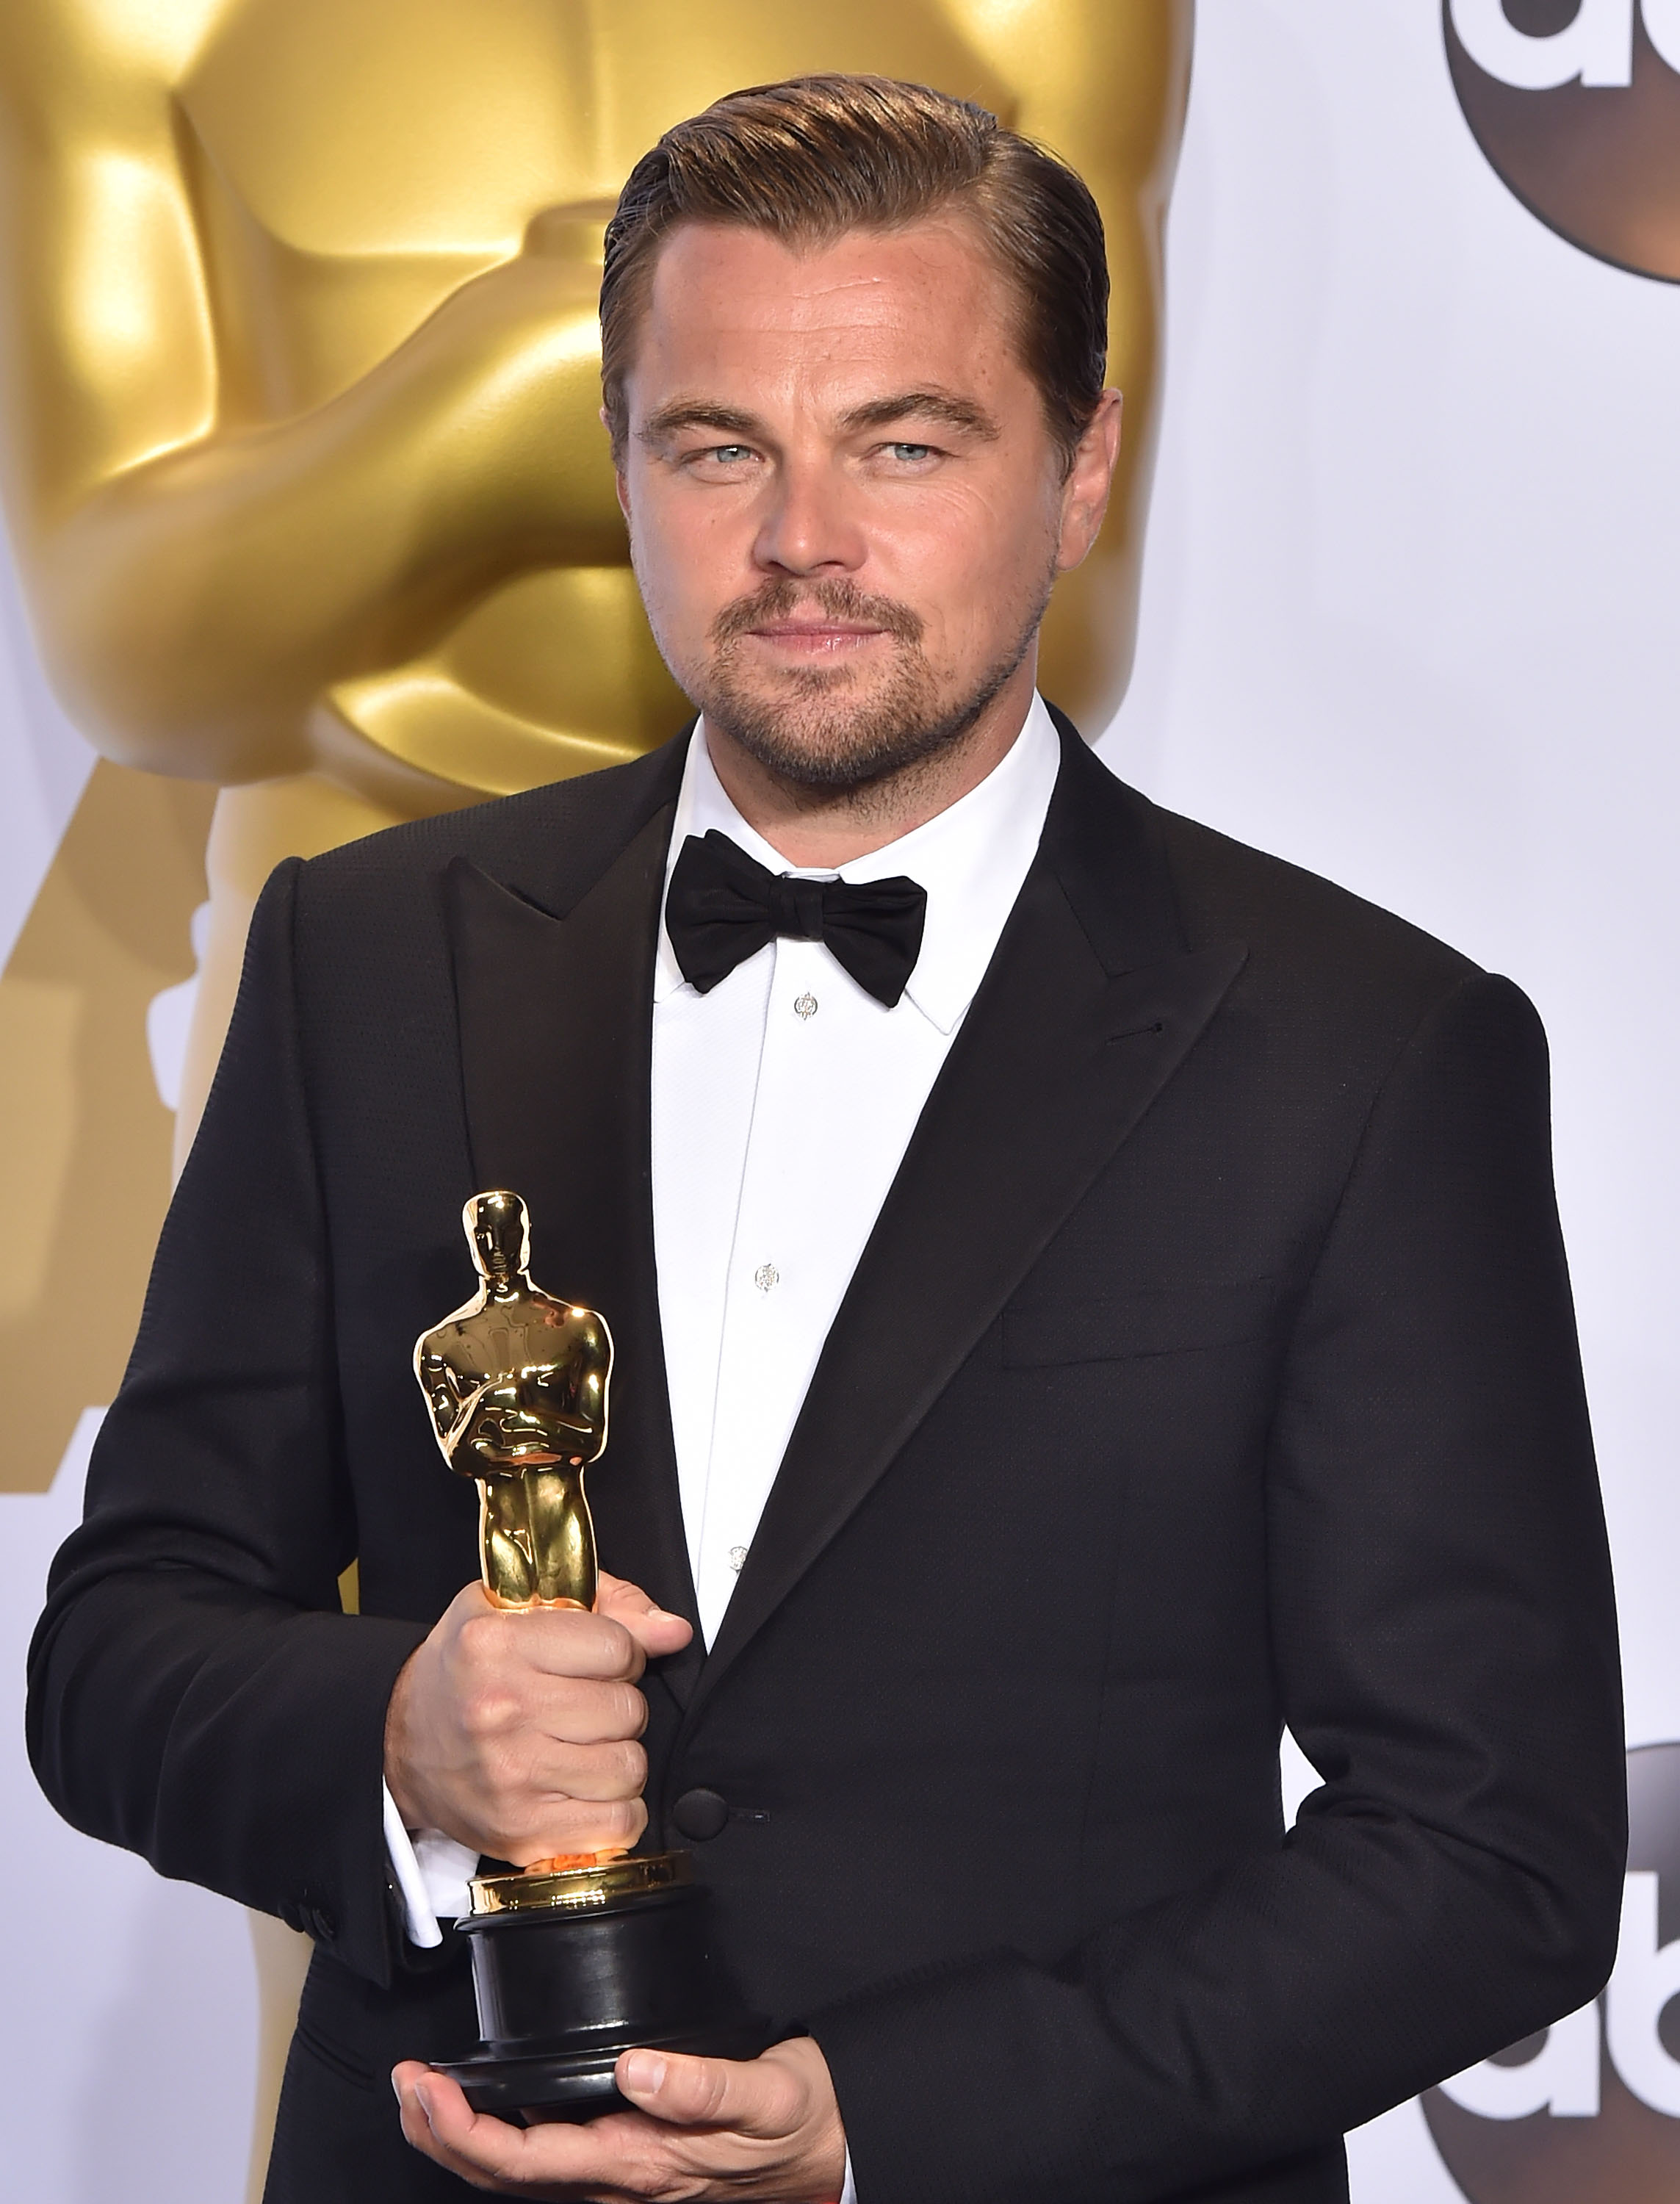 Leonardo DiCaprio poses with his golden statuette during the 88th Annual Academy Awards on February 28, 2016 | Source: Getty Images